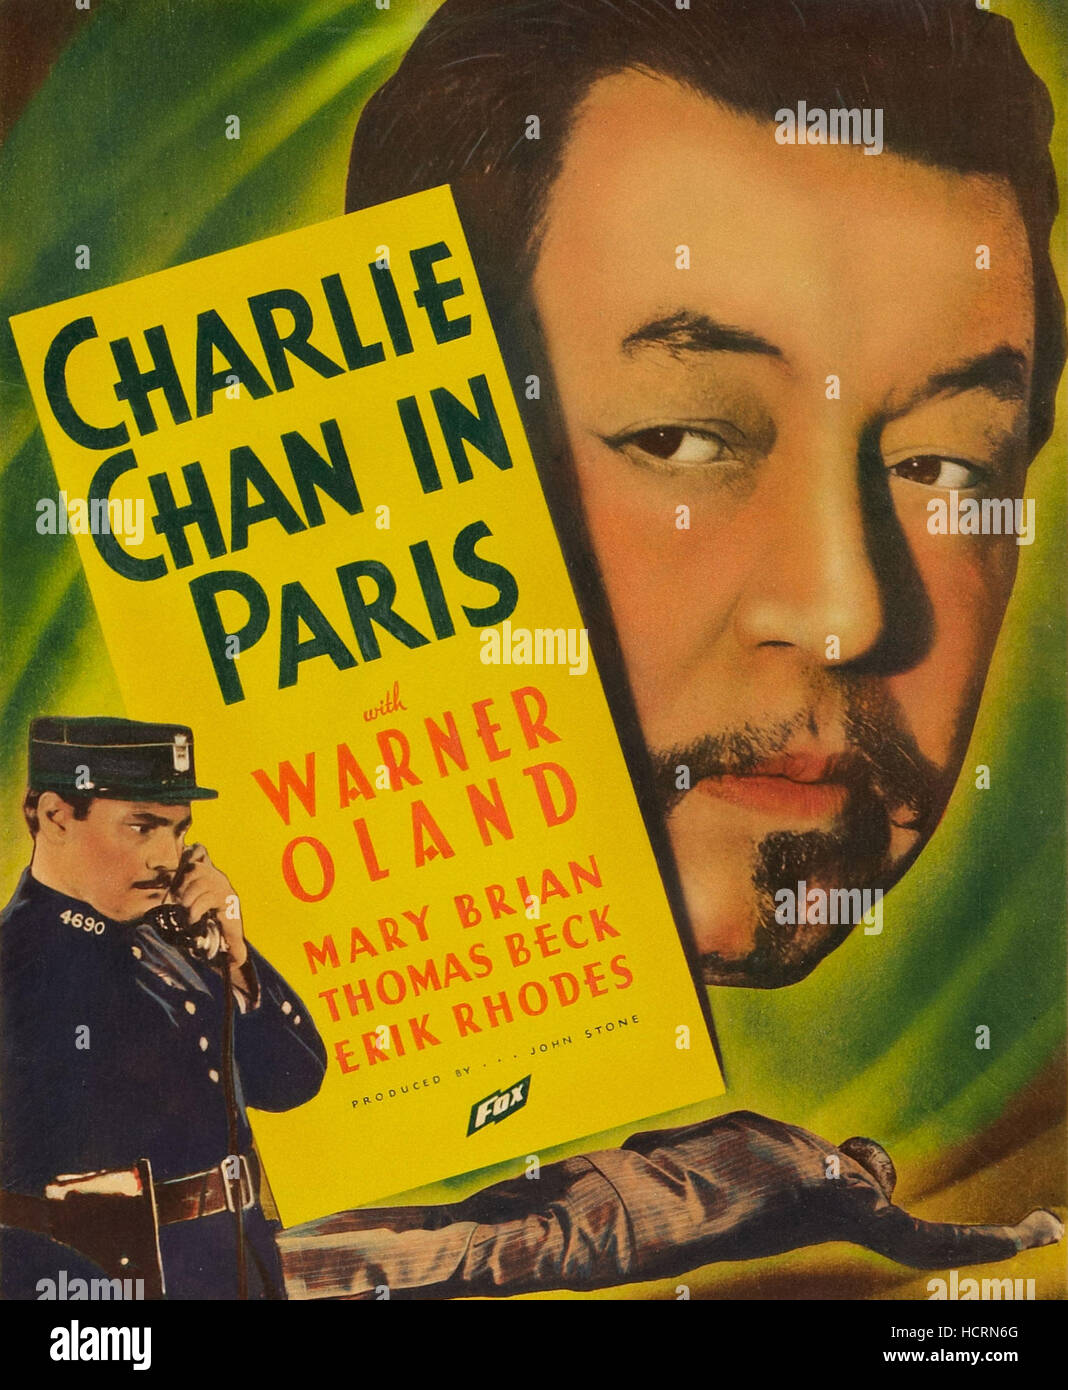 CHARLIE CHAN IN PARIS, Warner Oland, 1935   TM and Copyright (c) 20th Century-Fox Film Corp. All Rights Reserved. Courtesy: Stock Photo